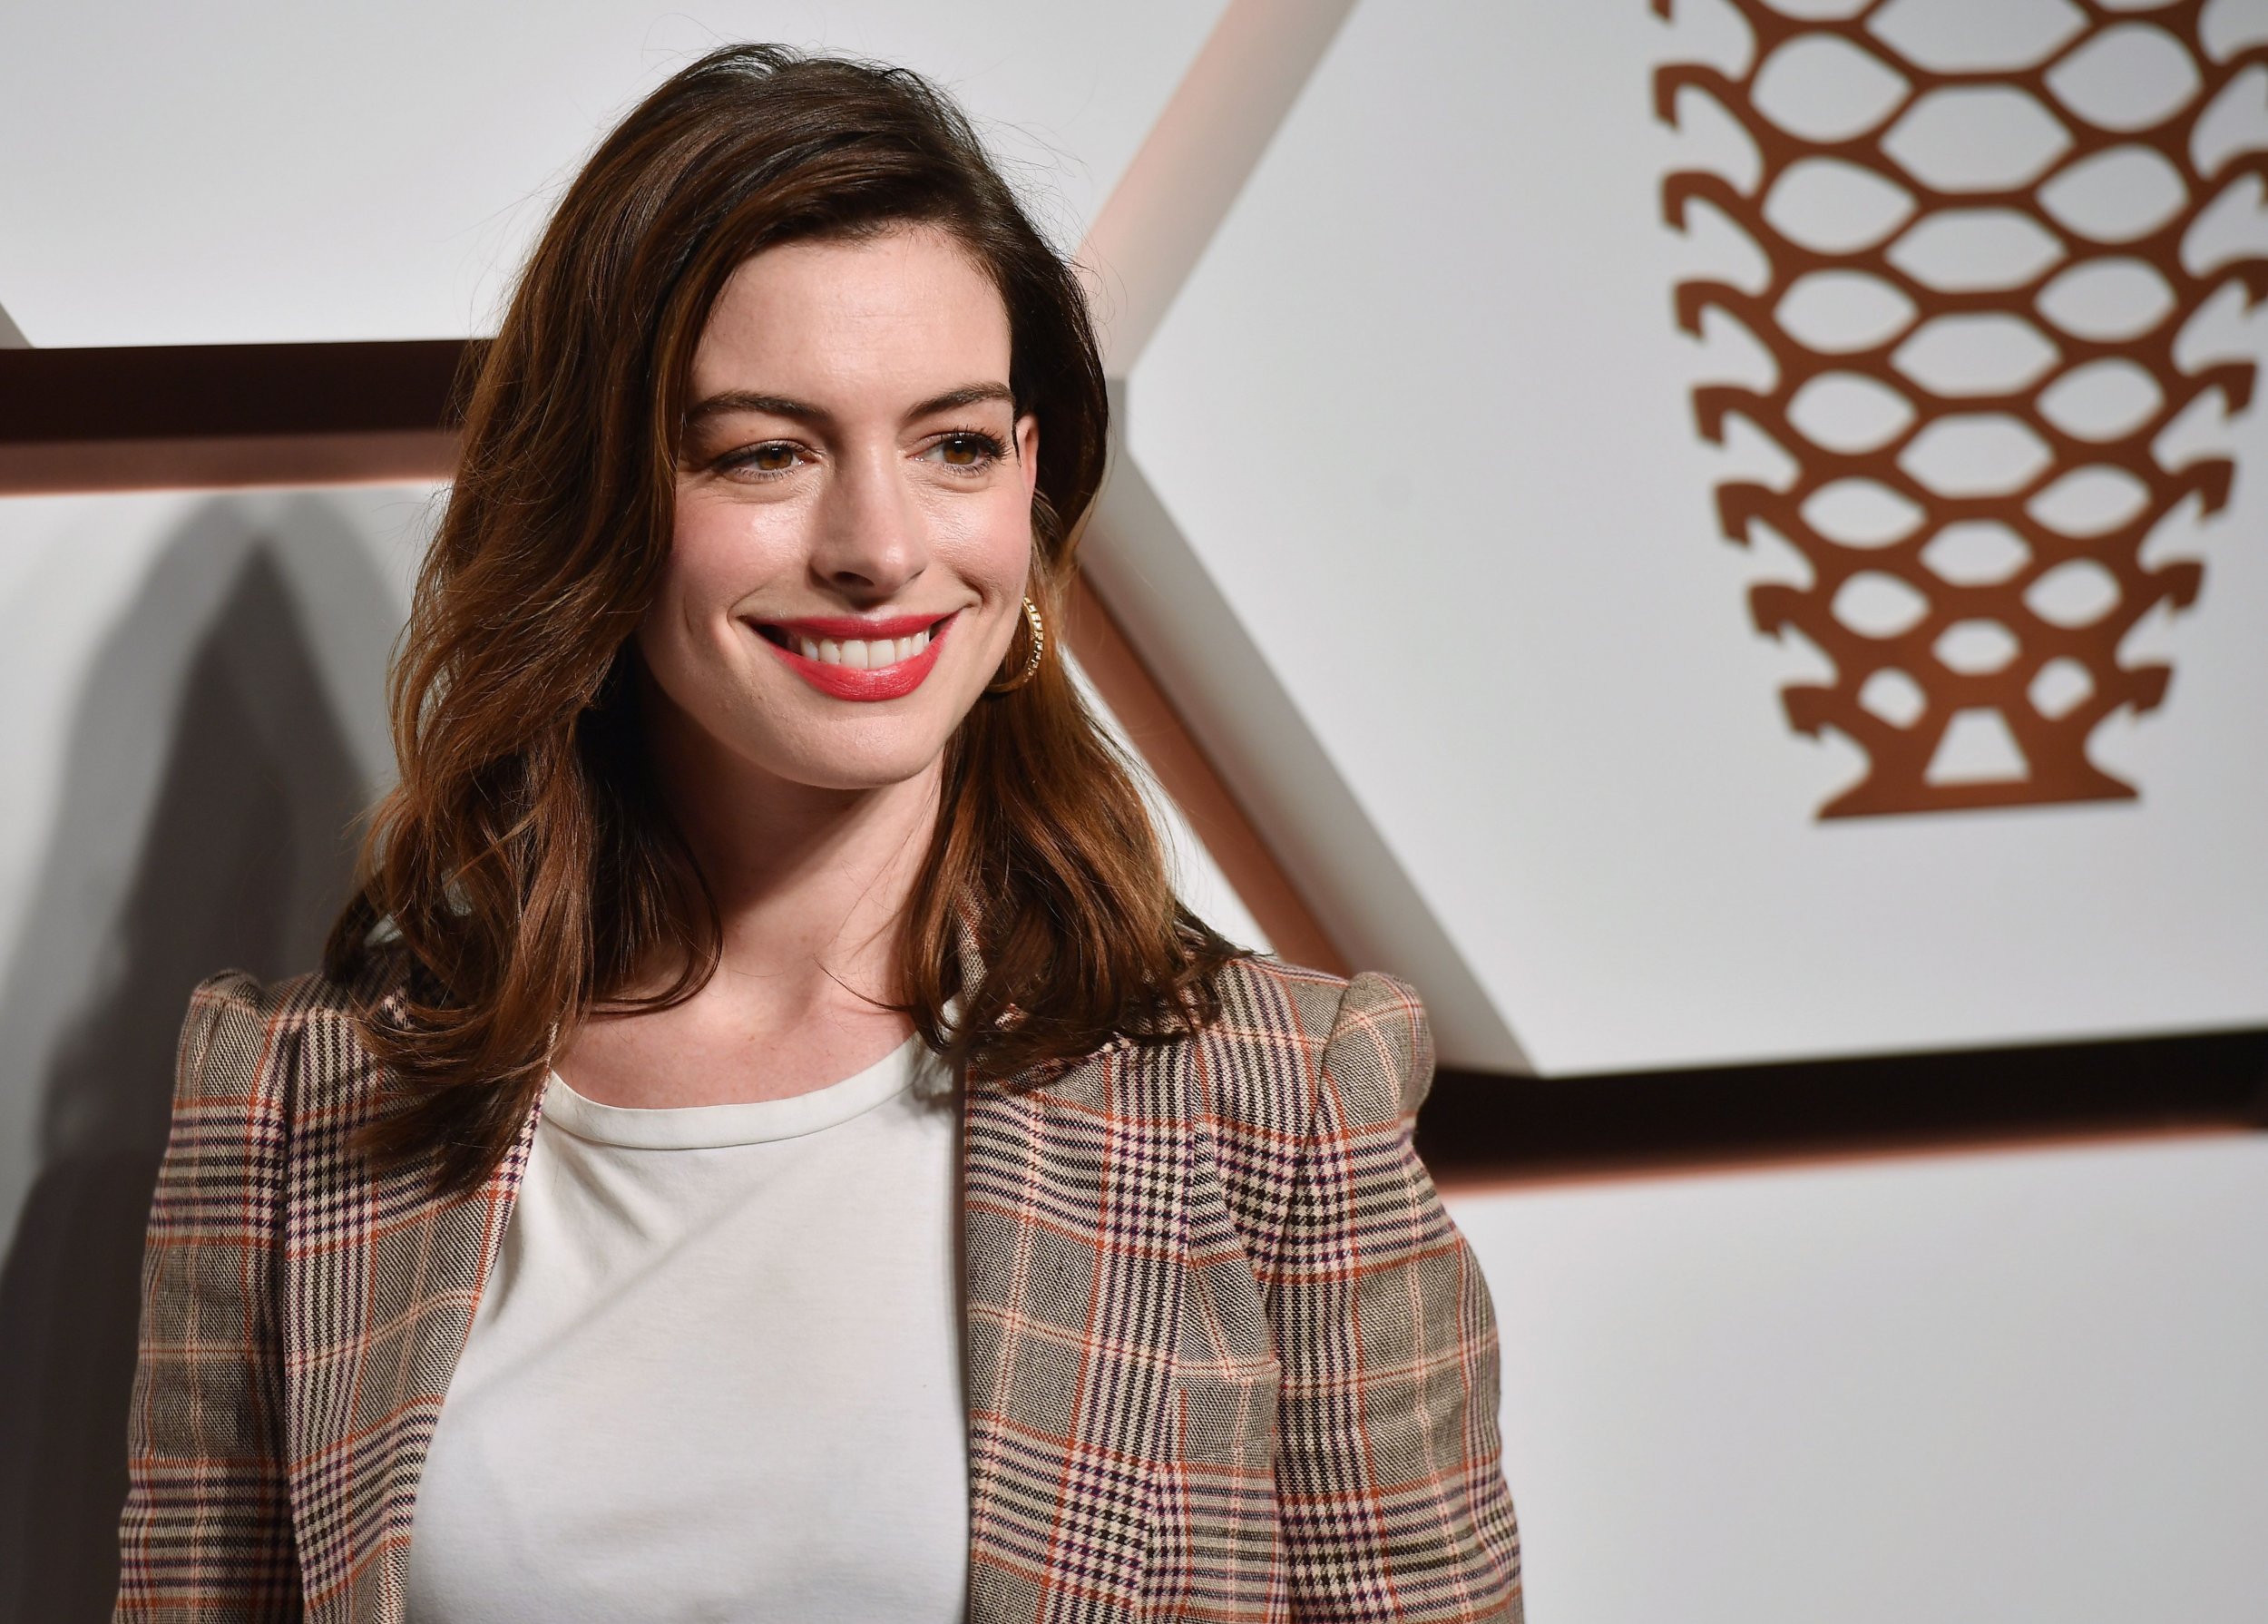 One of the celebrities who quit veganism: Anne Hathaway